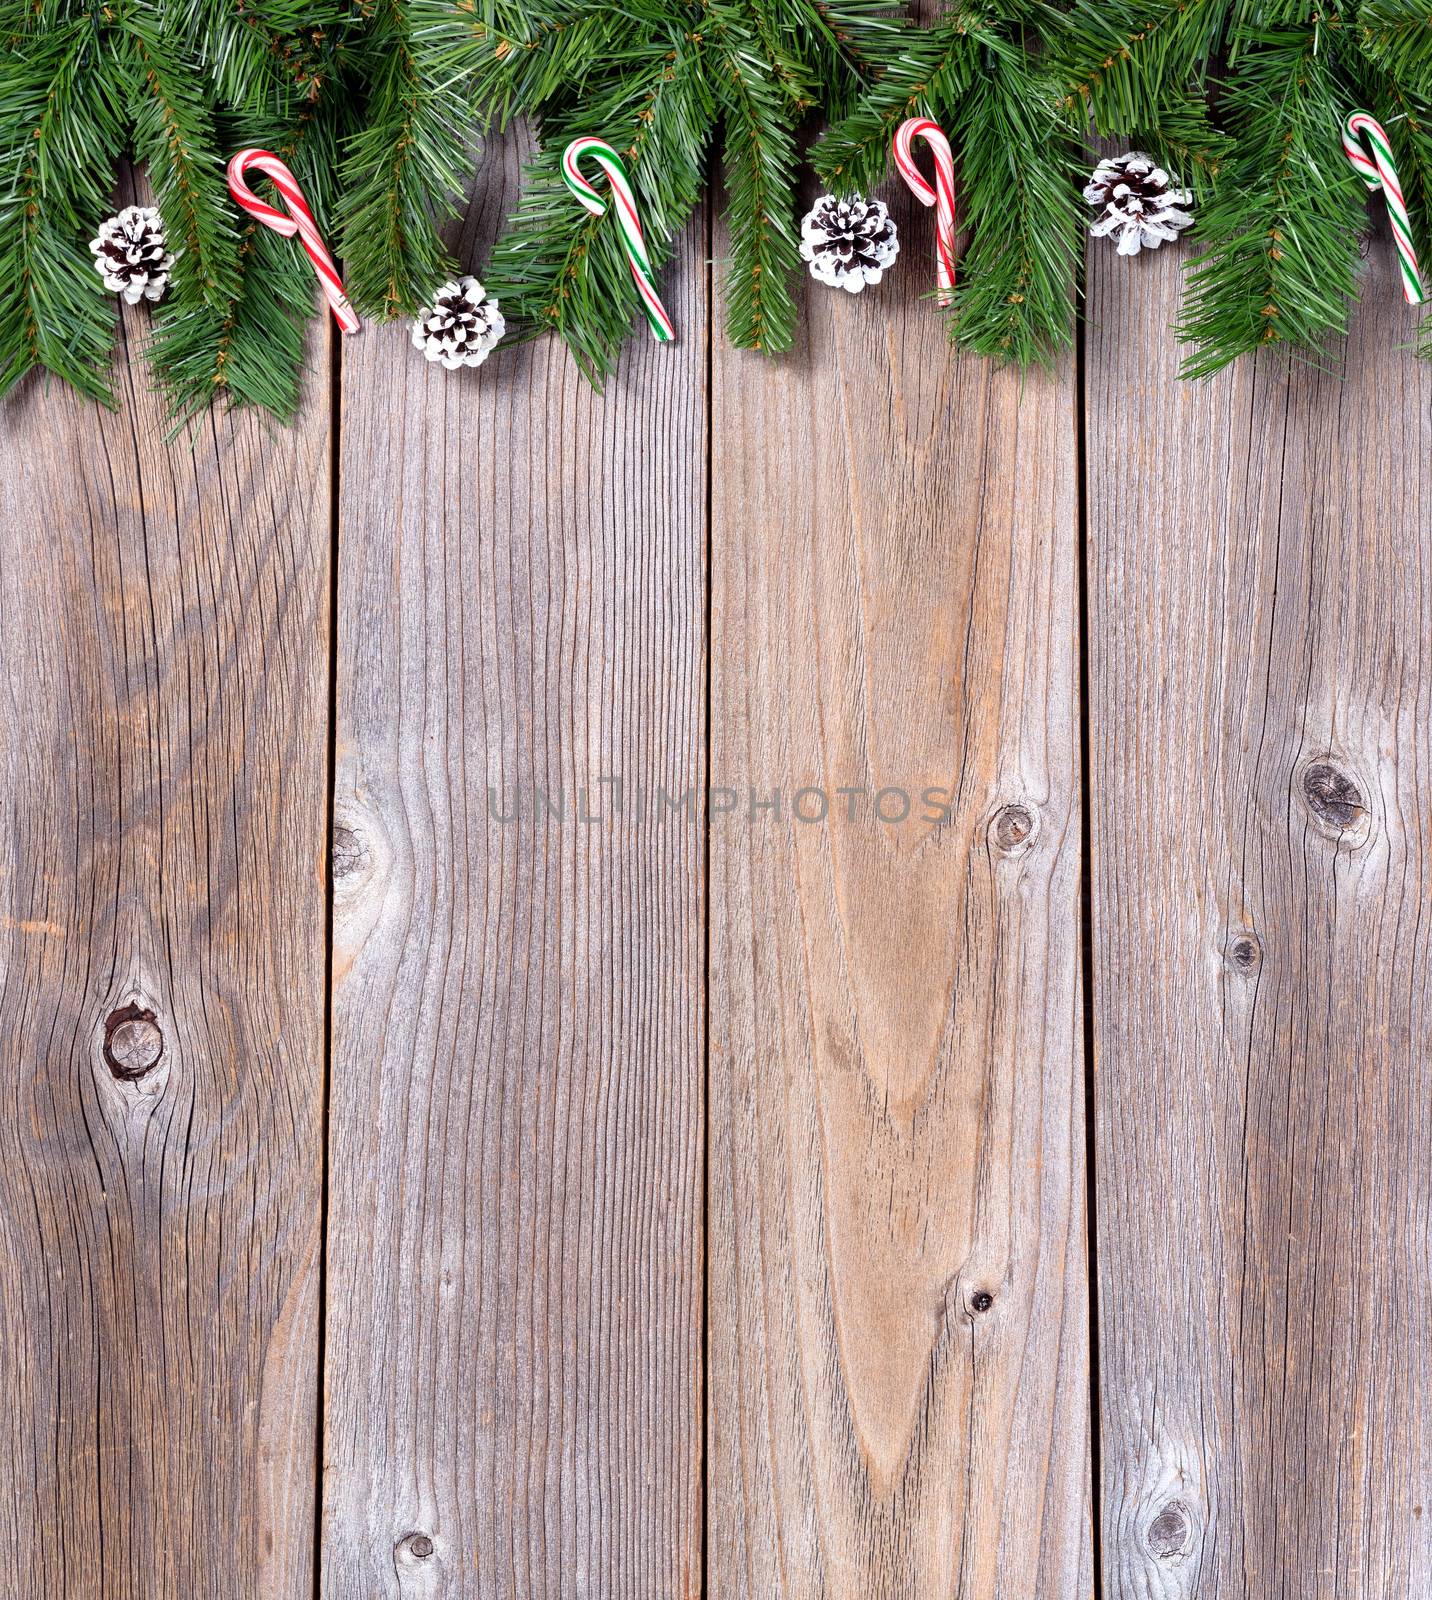 Xmas holiday wooden background with fir branches and candy canes by tab1962